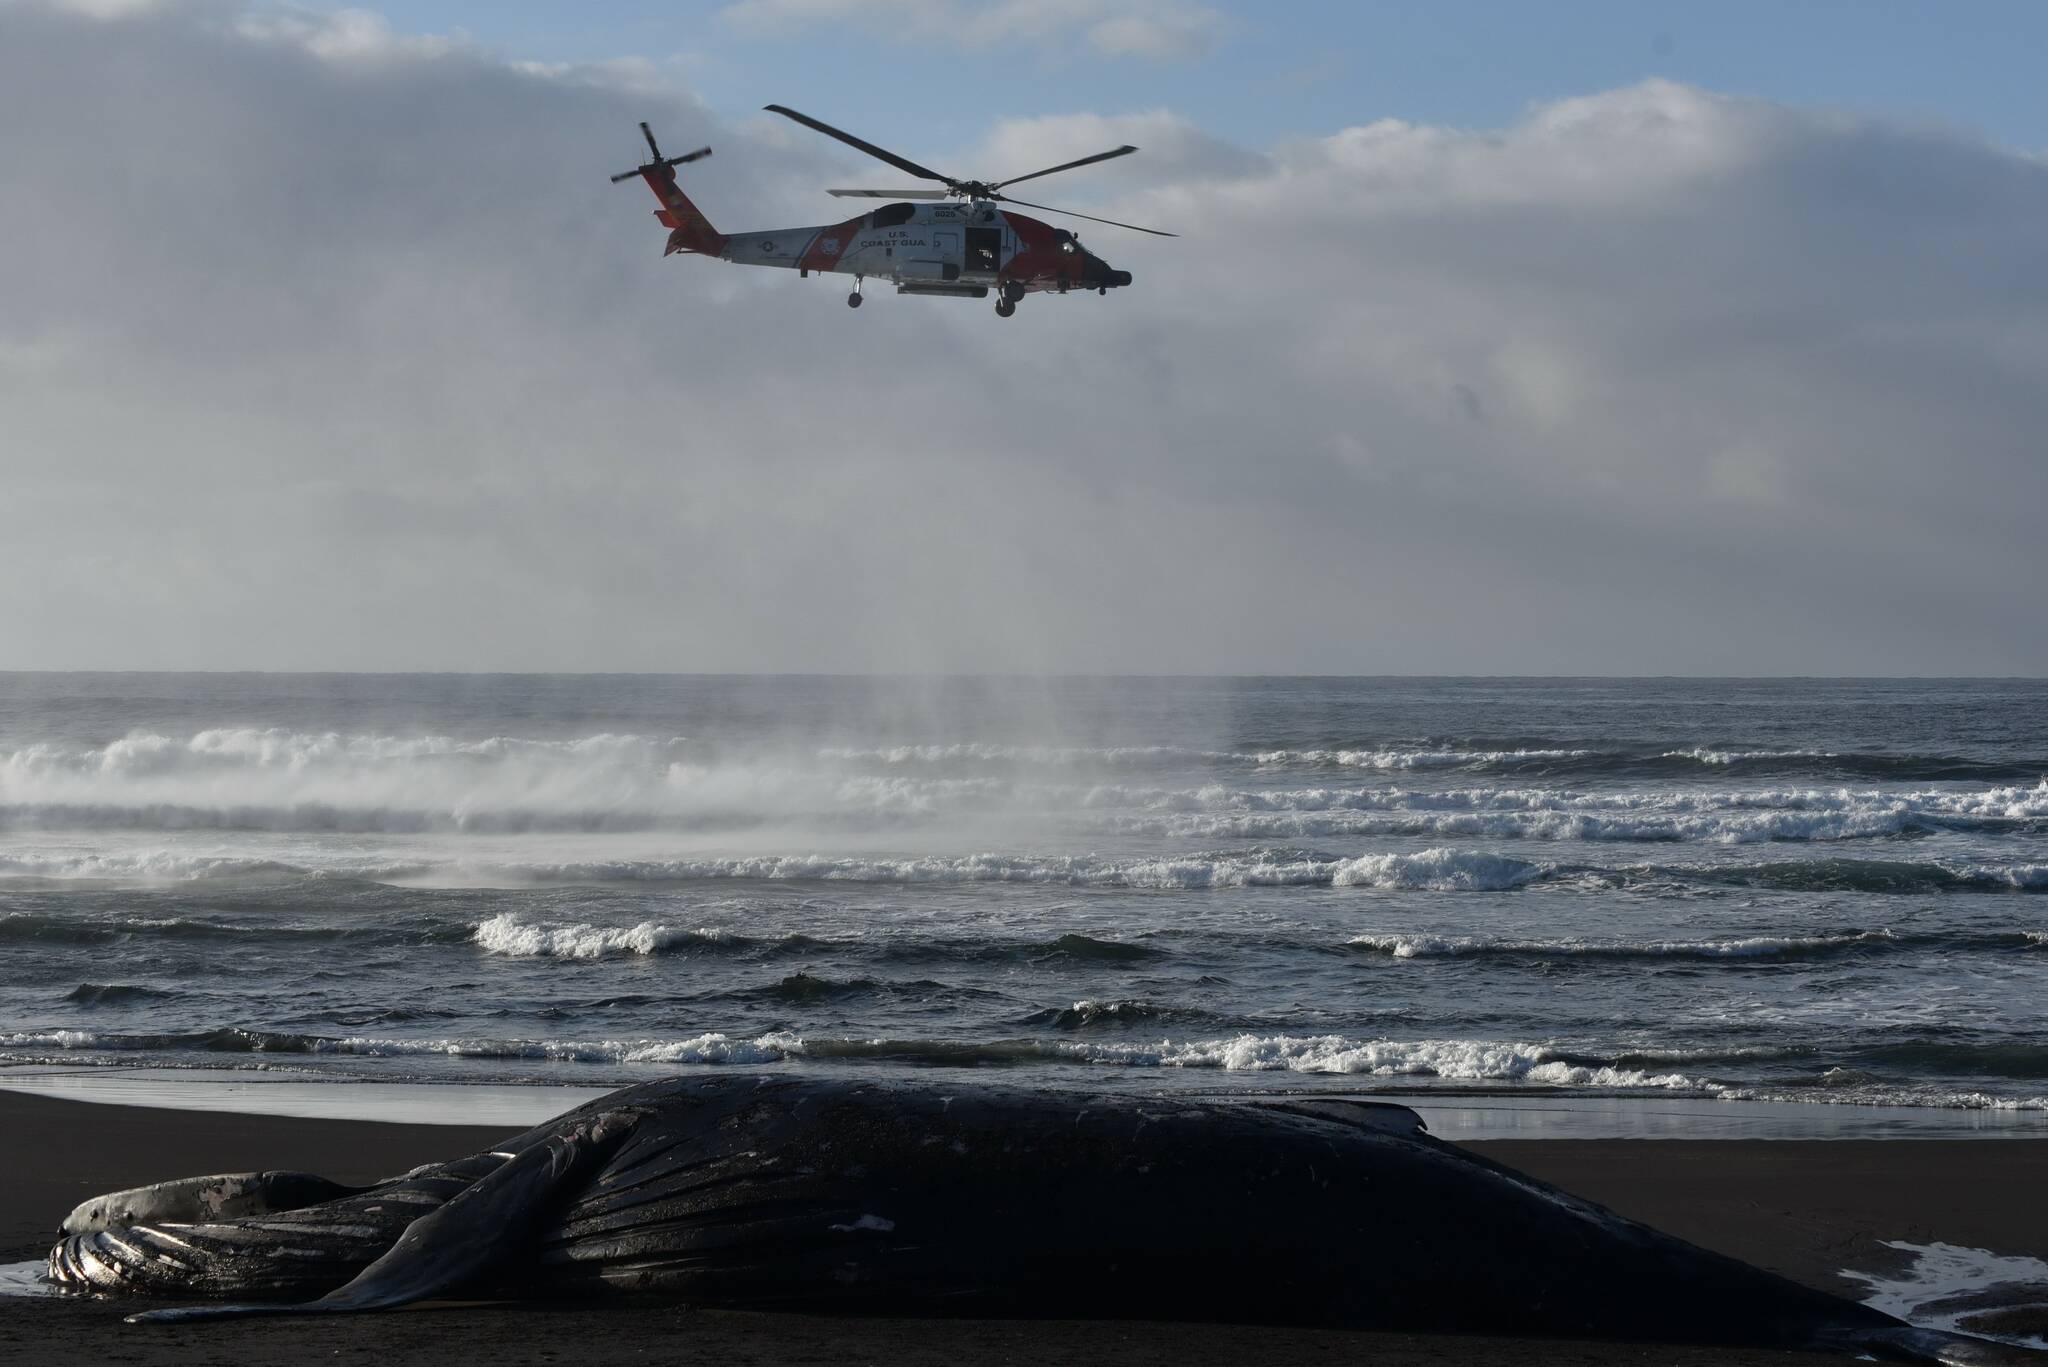 Courtesy photo / Alaska Marine Mammal Stranding Network
A U.S. Coast Guard helicopter helps ferry volunteers to the carcass of a beached humpback whale on Kuzof Island on Thursday, March 18, 2021.